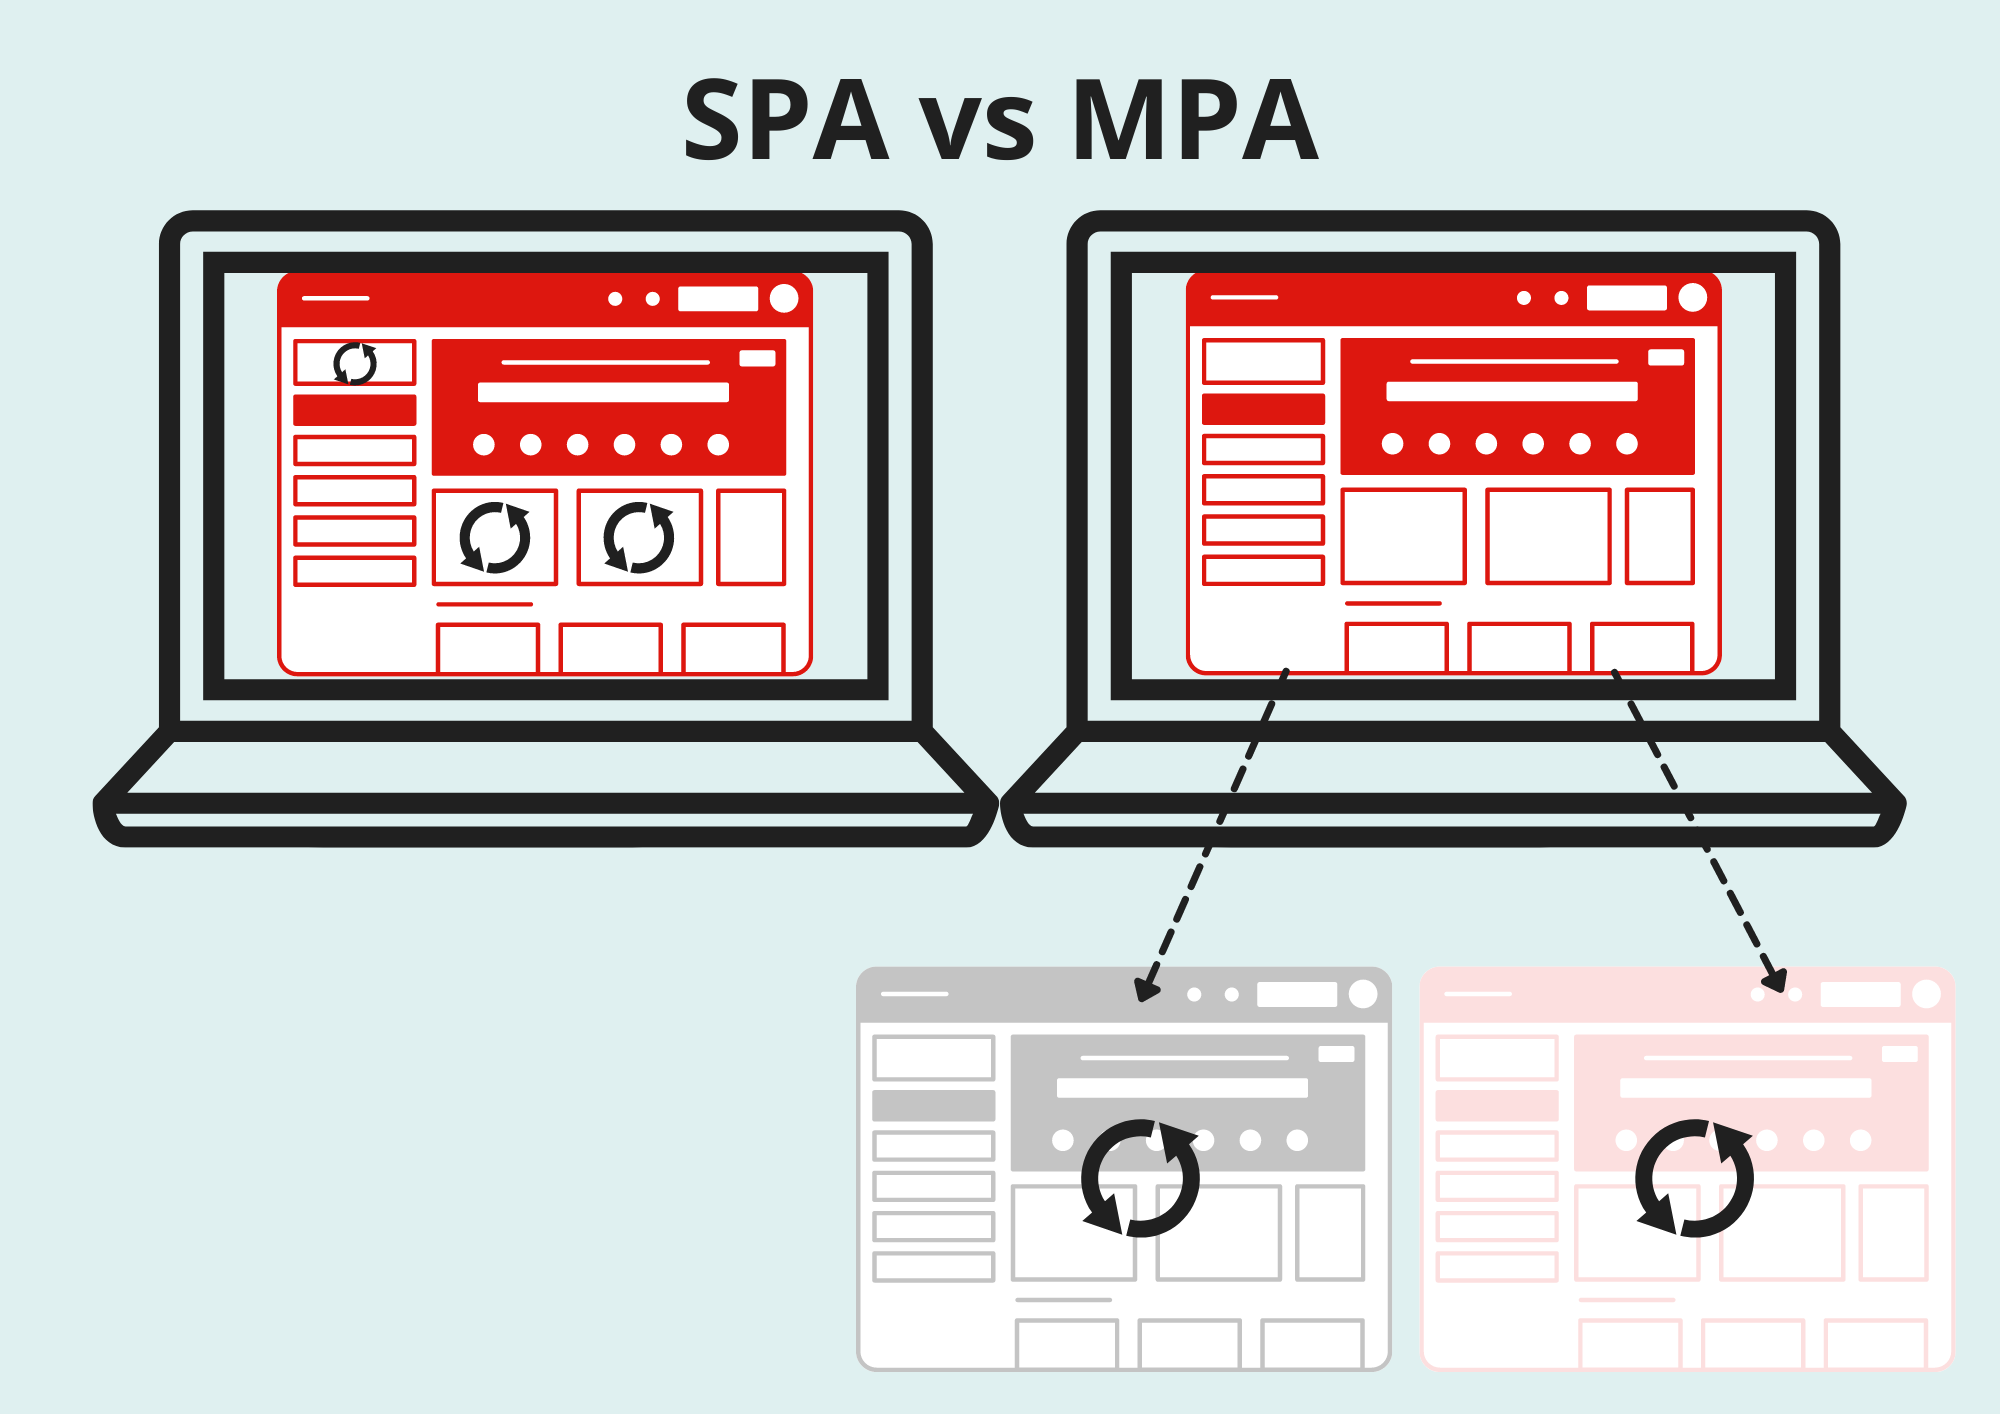 SPA vs MPA user experience comparison - SPA is only updating the relevant parts of the page